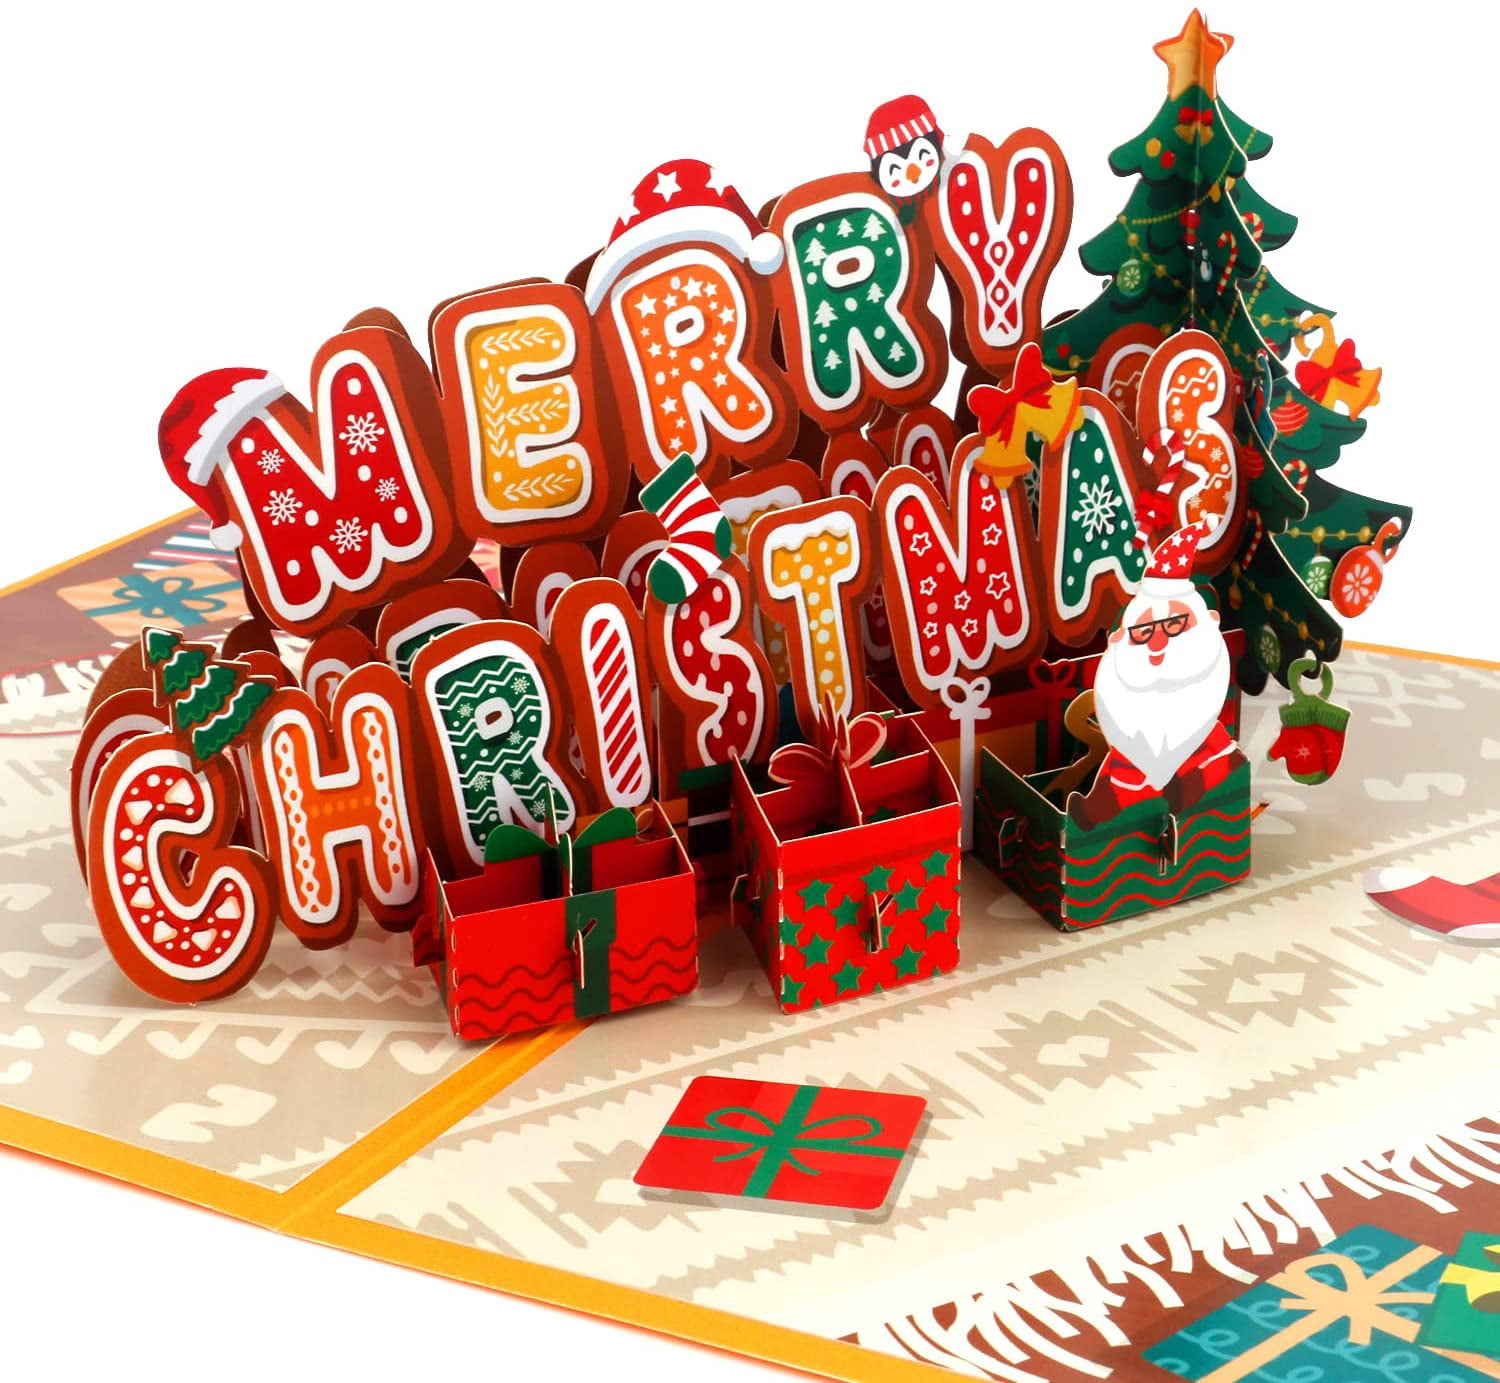 3D Pop Up Card Merry Christmas Santa Claus Children Greeting Gift Happy Cards